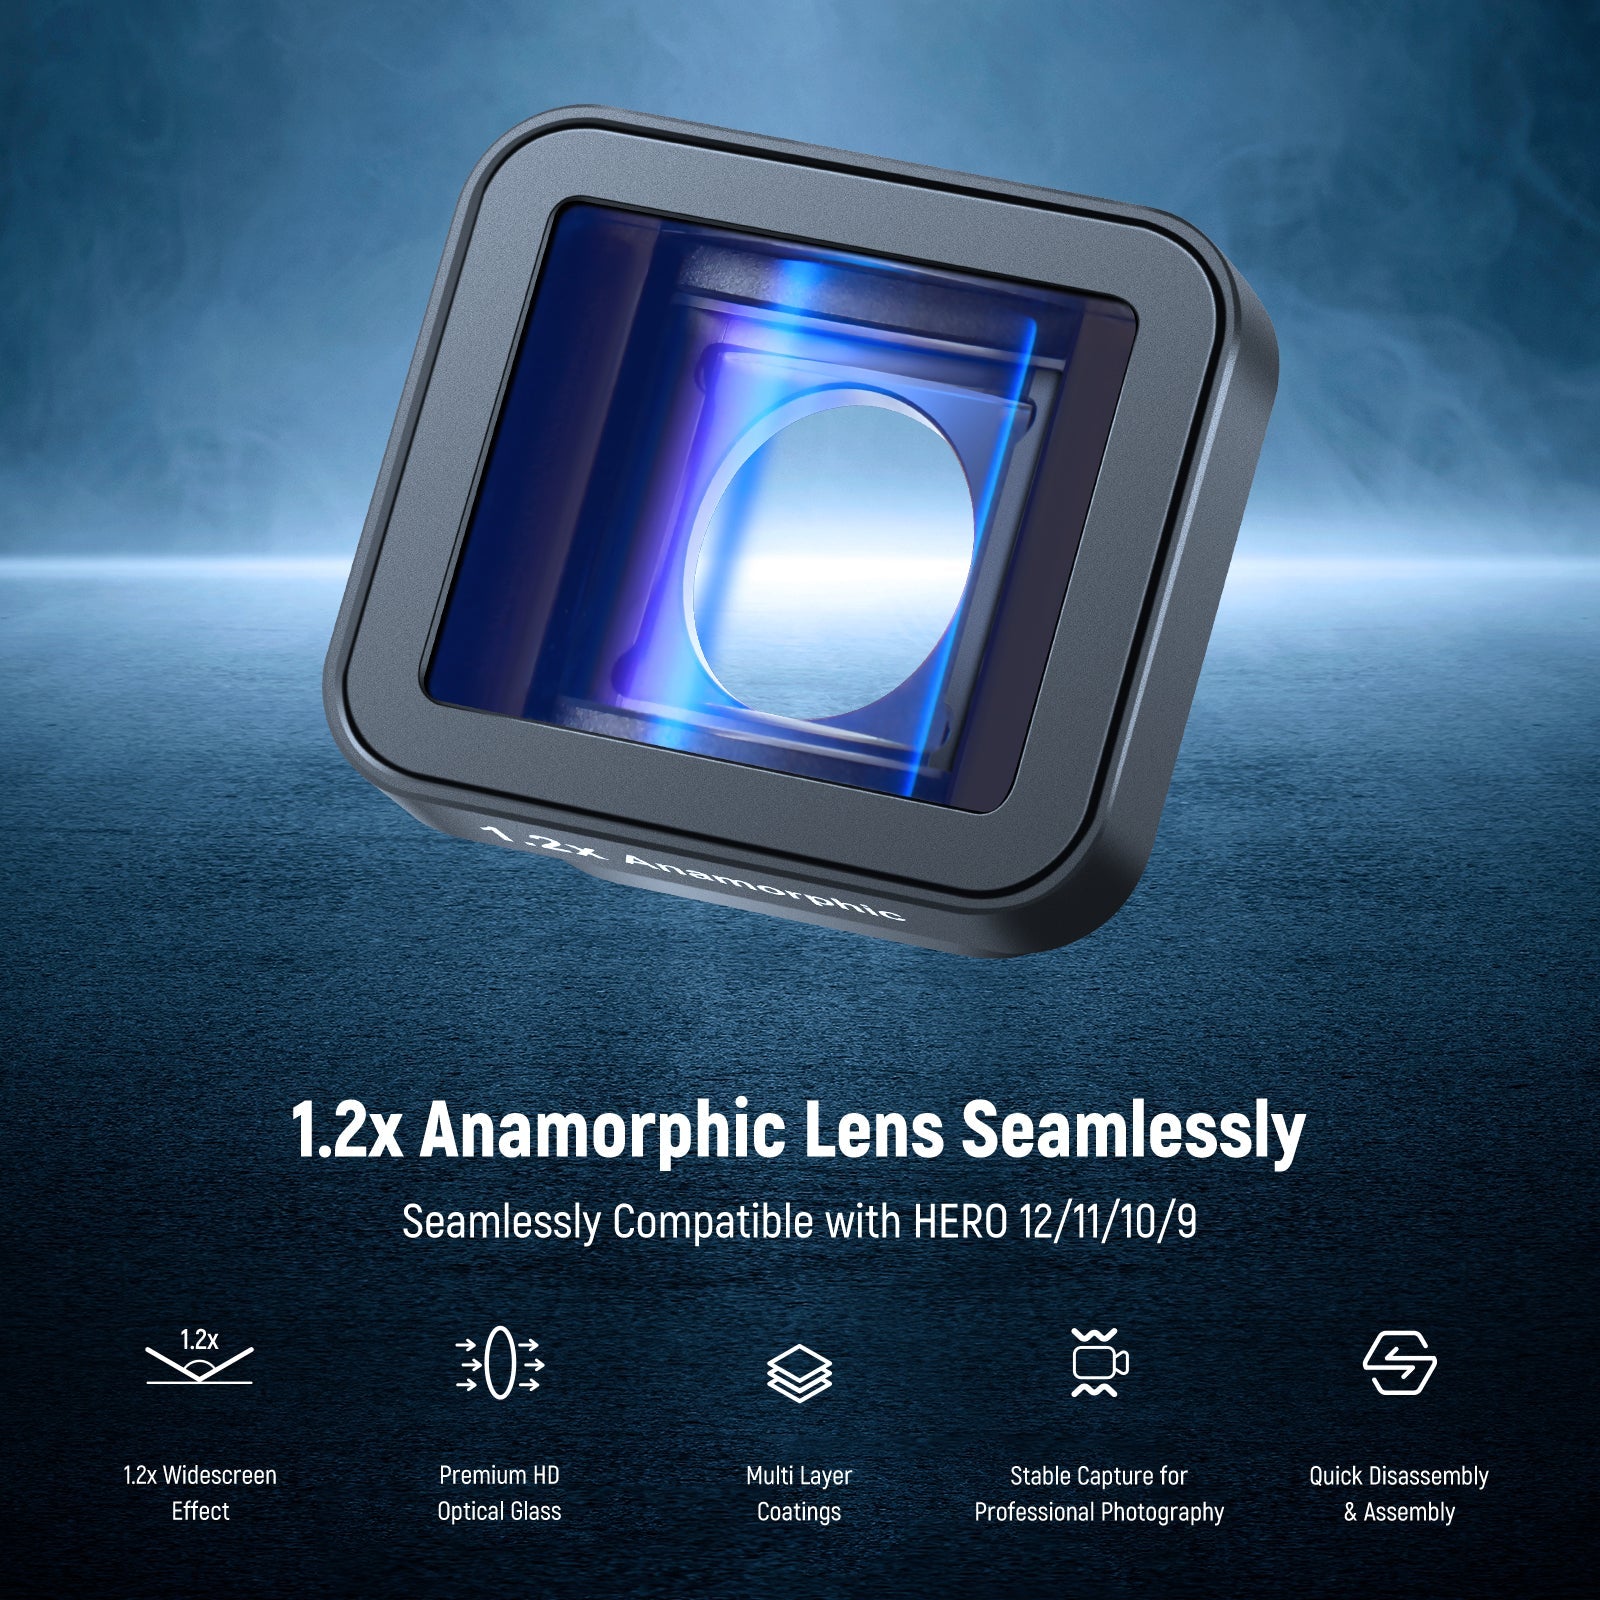 NEEWER LS-56 1.2x Anamorphic Lens Compatible with GoPro Hero 12 11 10 9